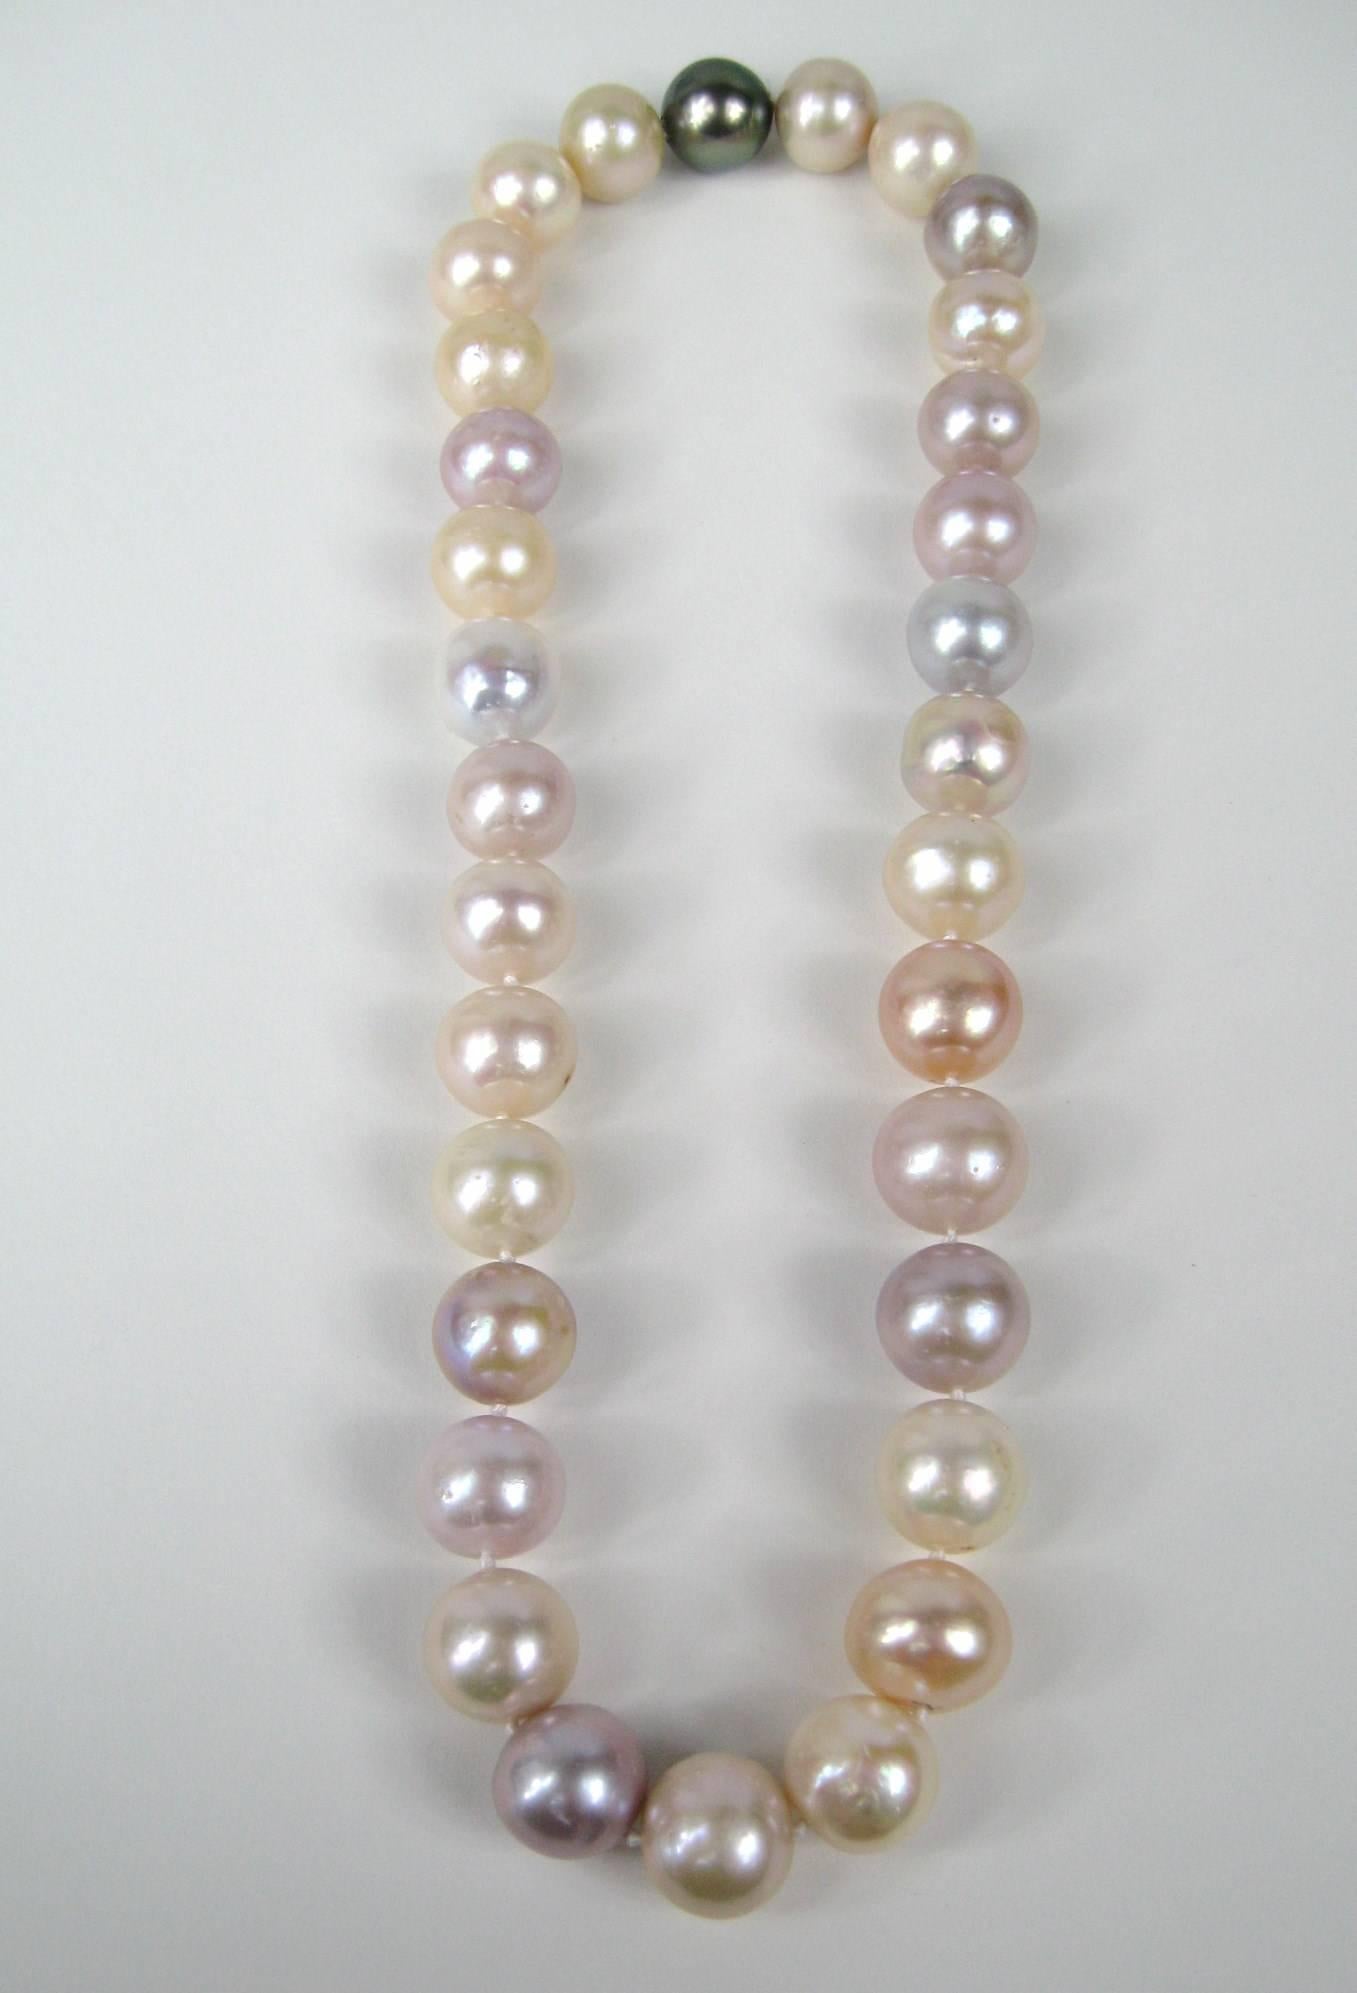 Stunning Large Pearl Choker Necklace. Pearls Measure 12.8 MM. Varying in color. Hidden screw closure where the black Pearl is. Measures 17.25n long end to end. This is out of a massive collection of Hopi, Zuni, Navajo, Southwestern, sterling silver,